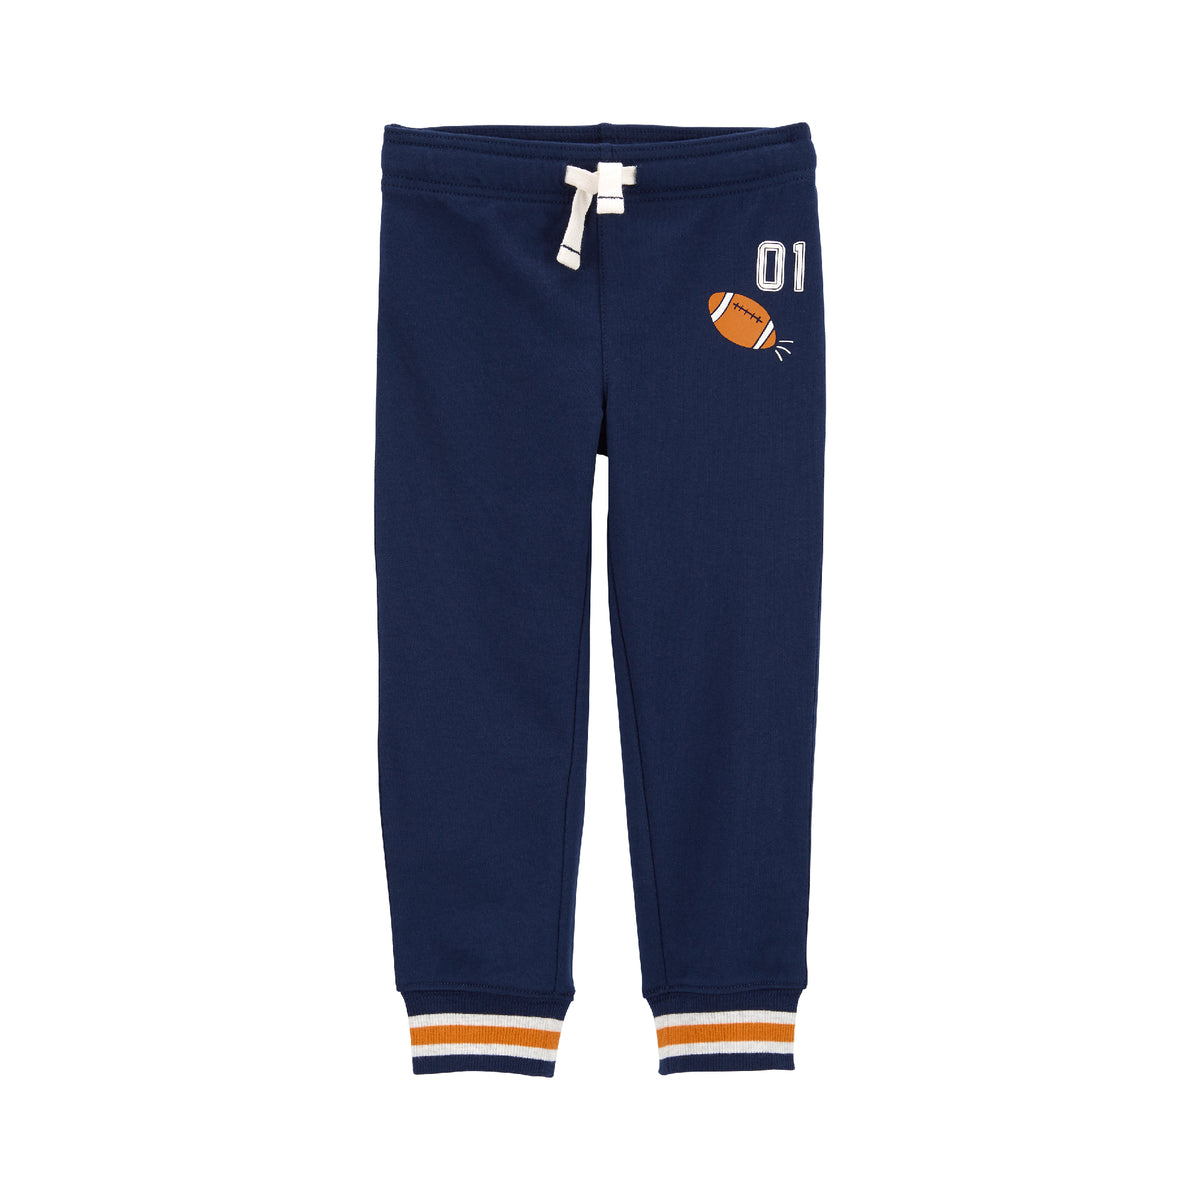 Carter's comfortable rugby graffiti trousers (12M-24M)